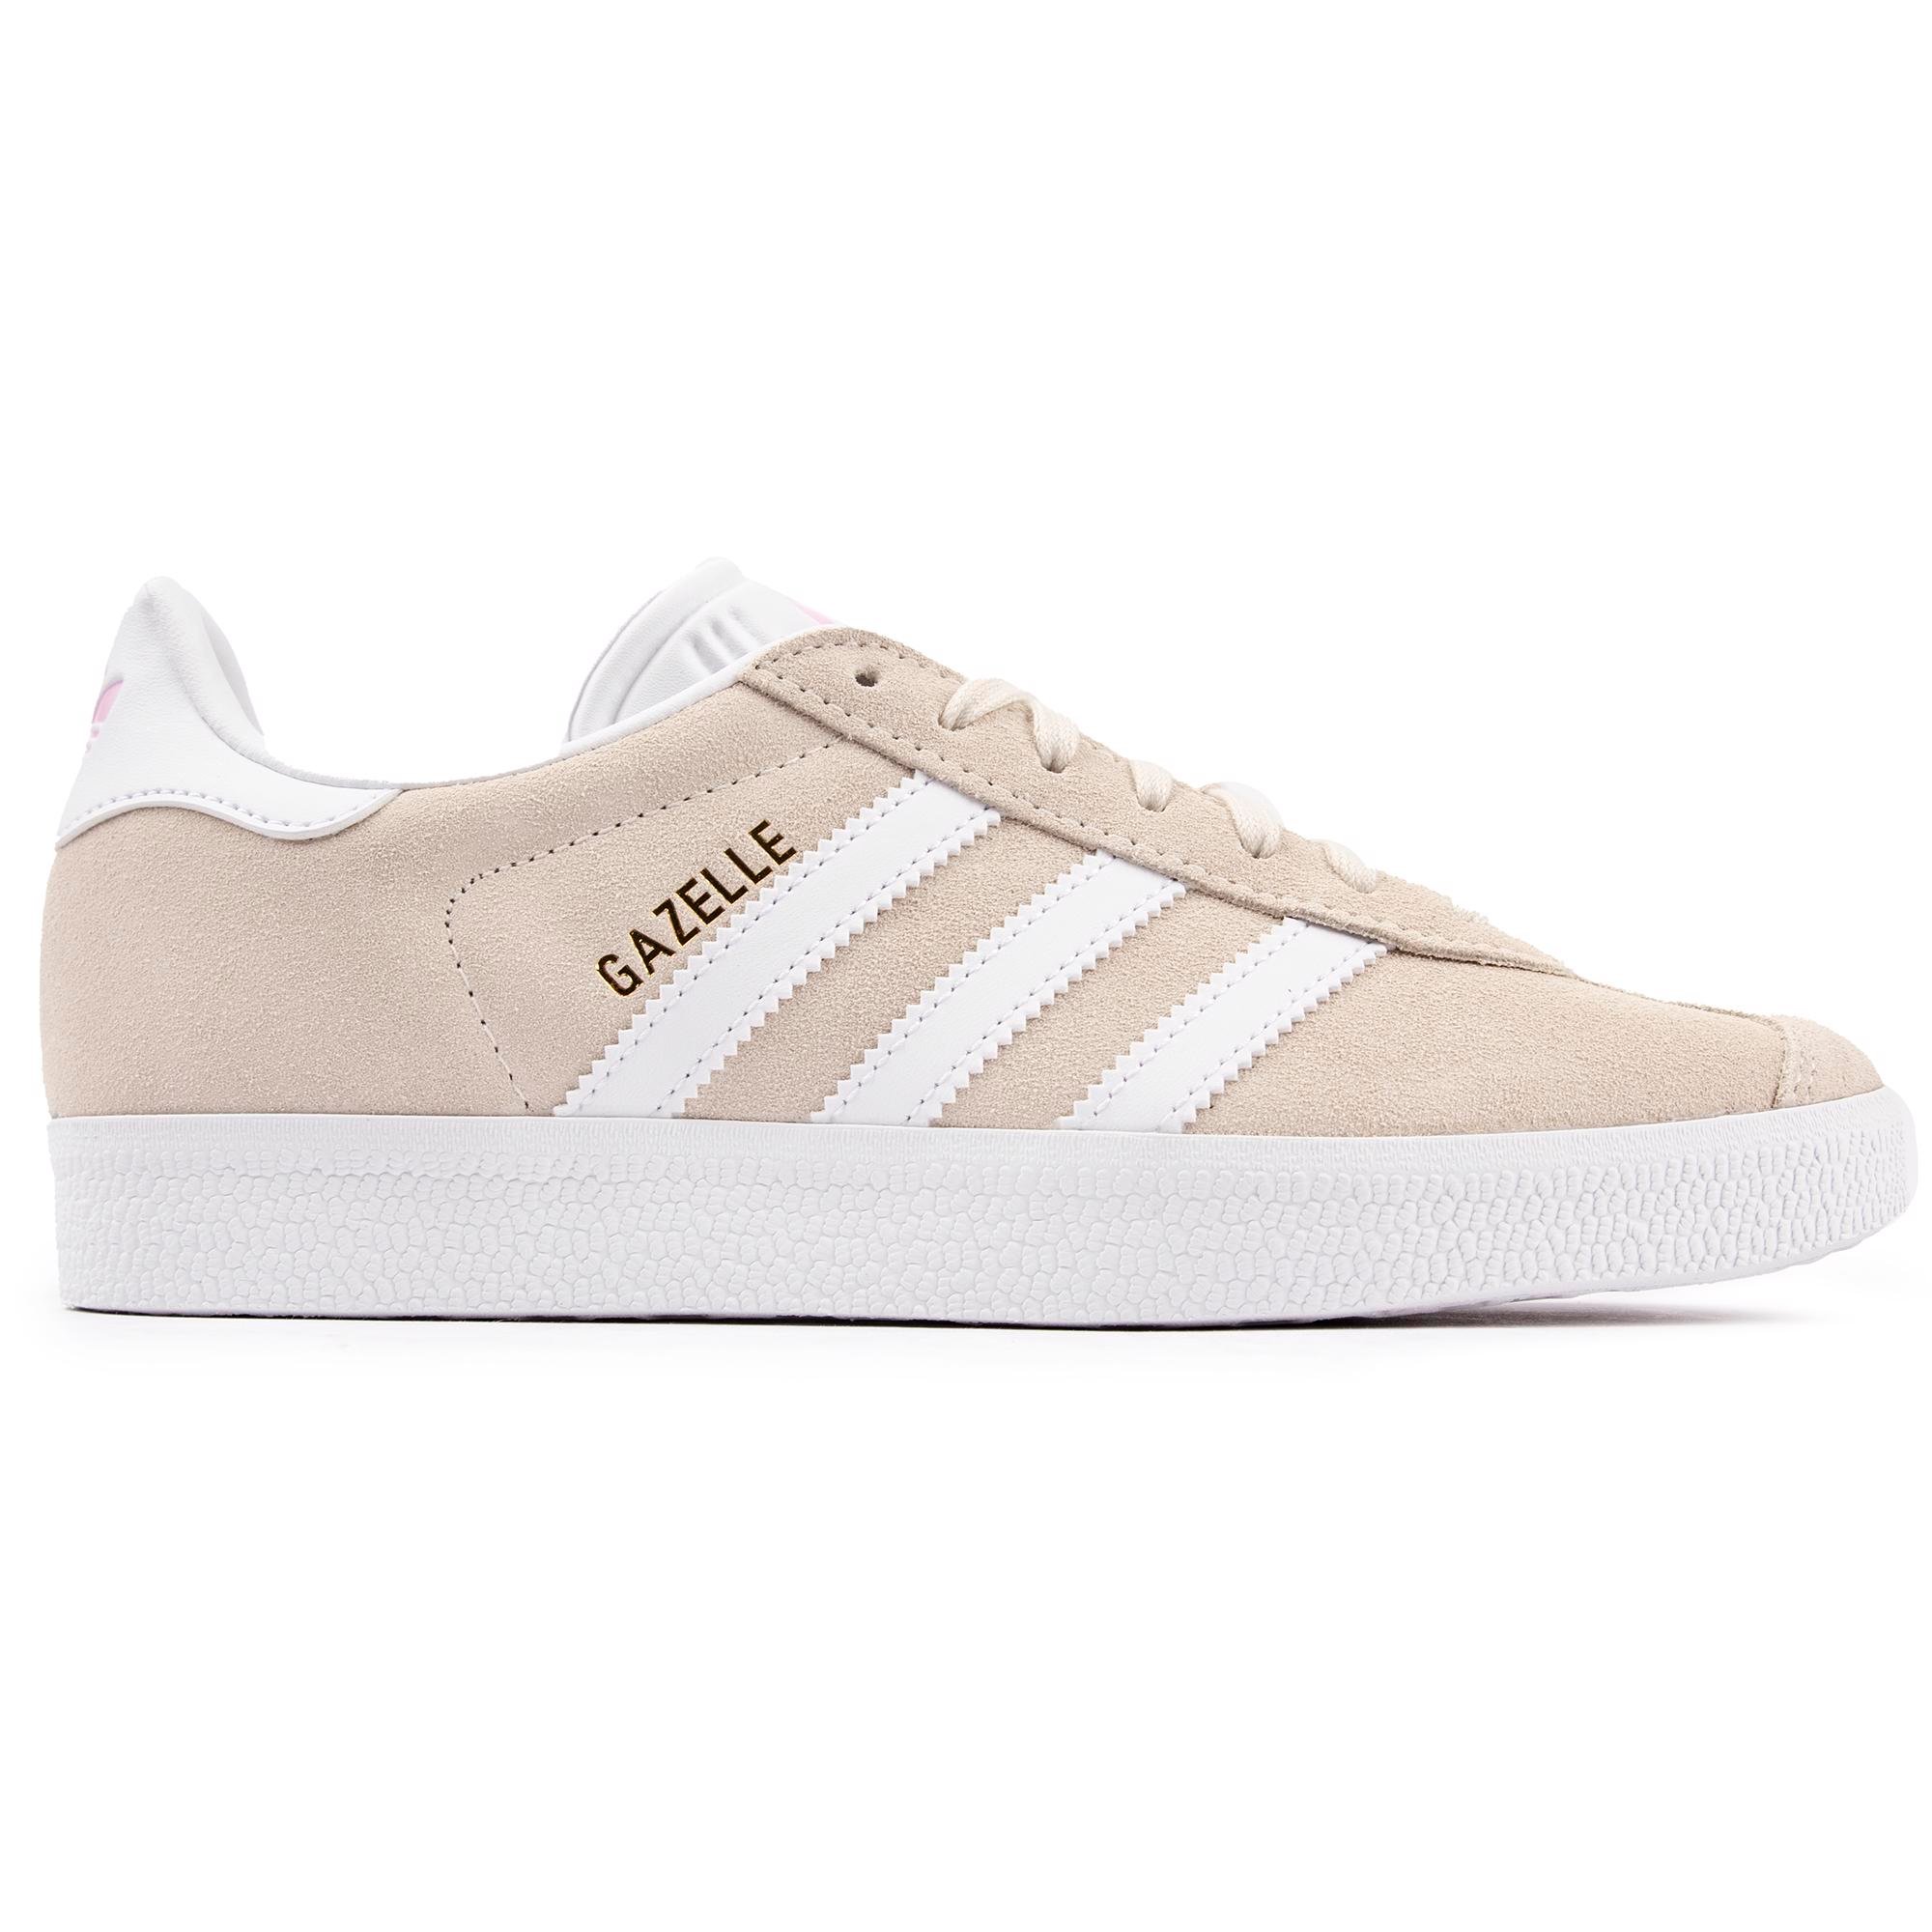 Womens off white/cloud white/clear pink Adidas Sneaker | Soletrader